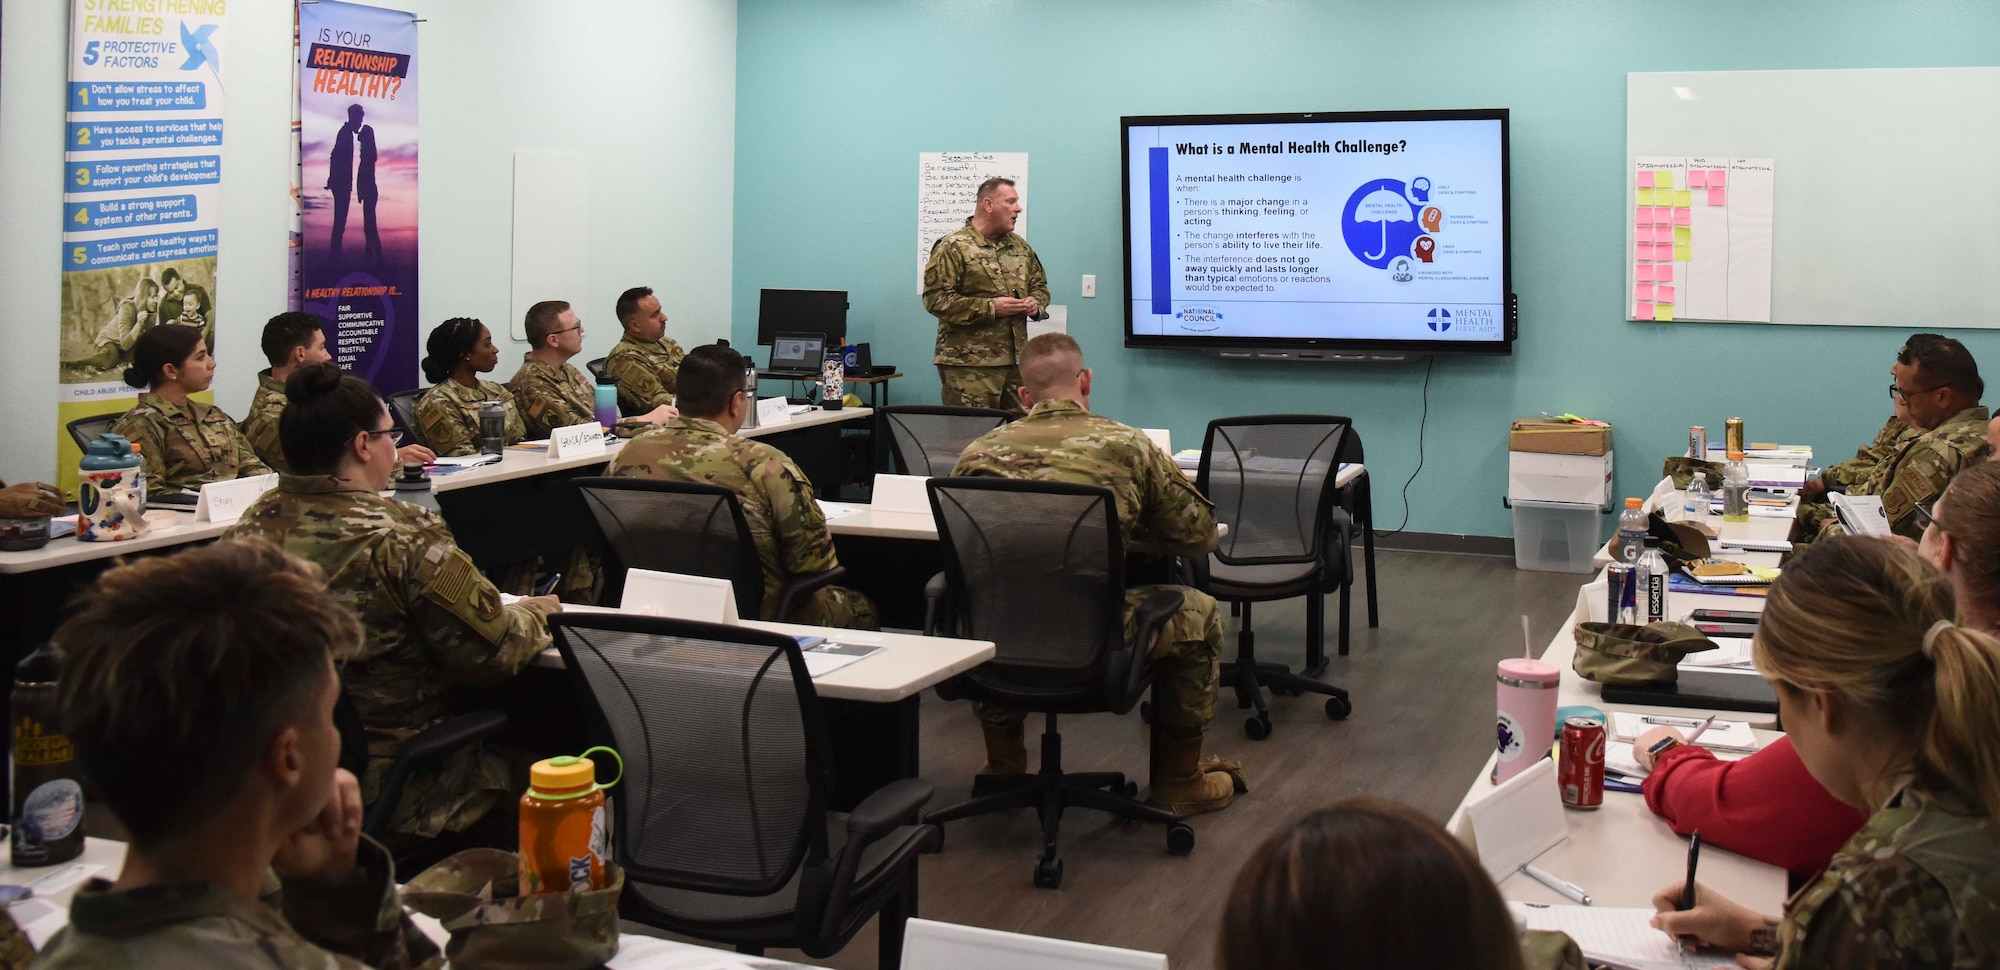 Pictured above is a group of Airmen listening to a brief in a classroom.